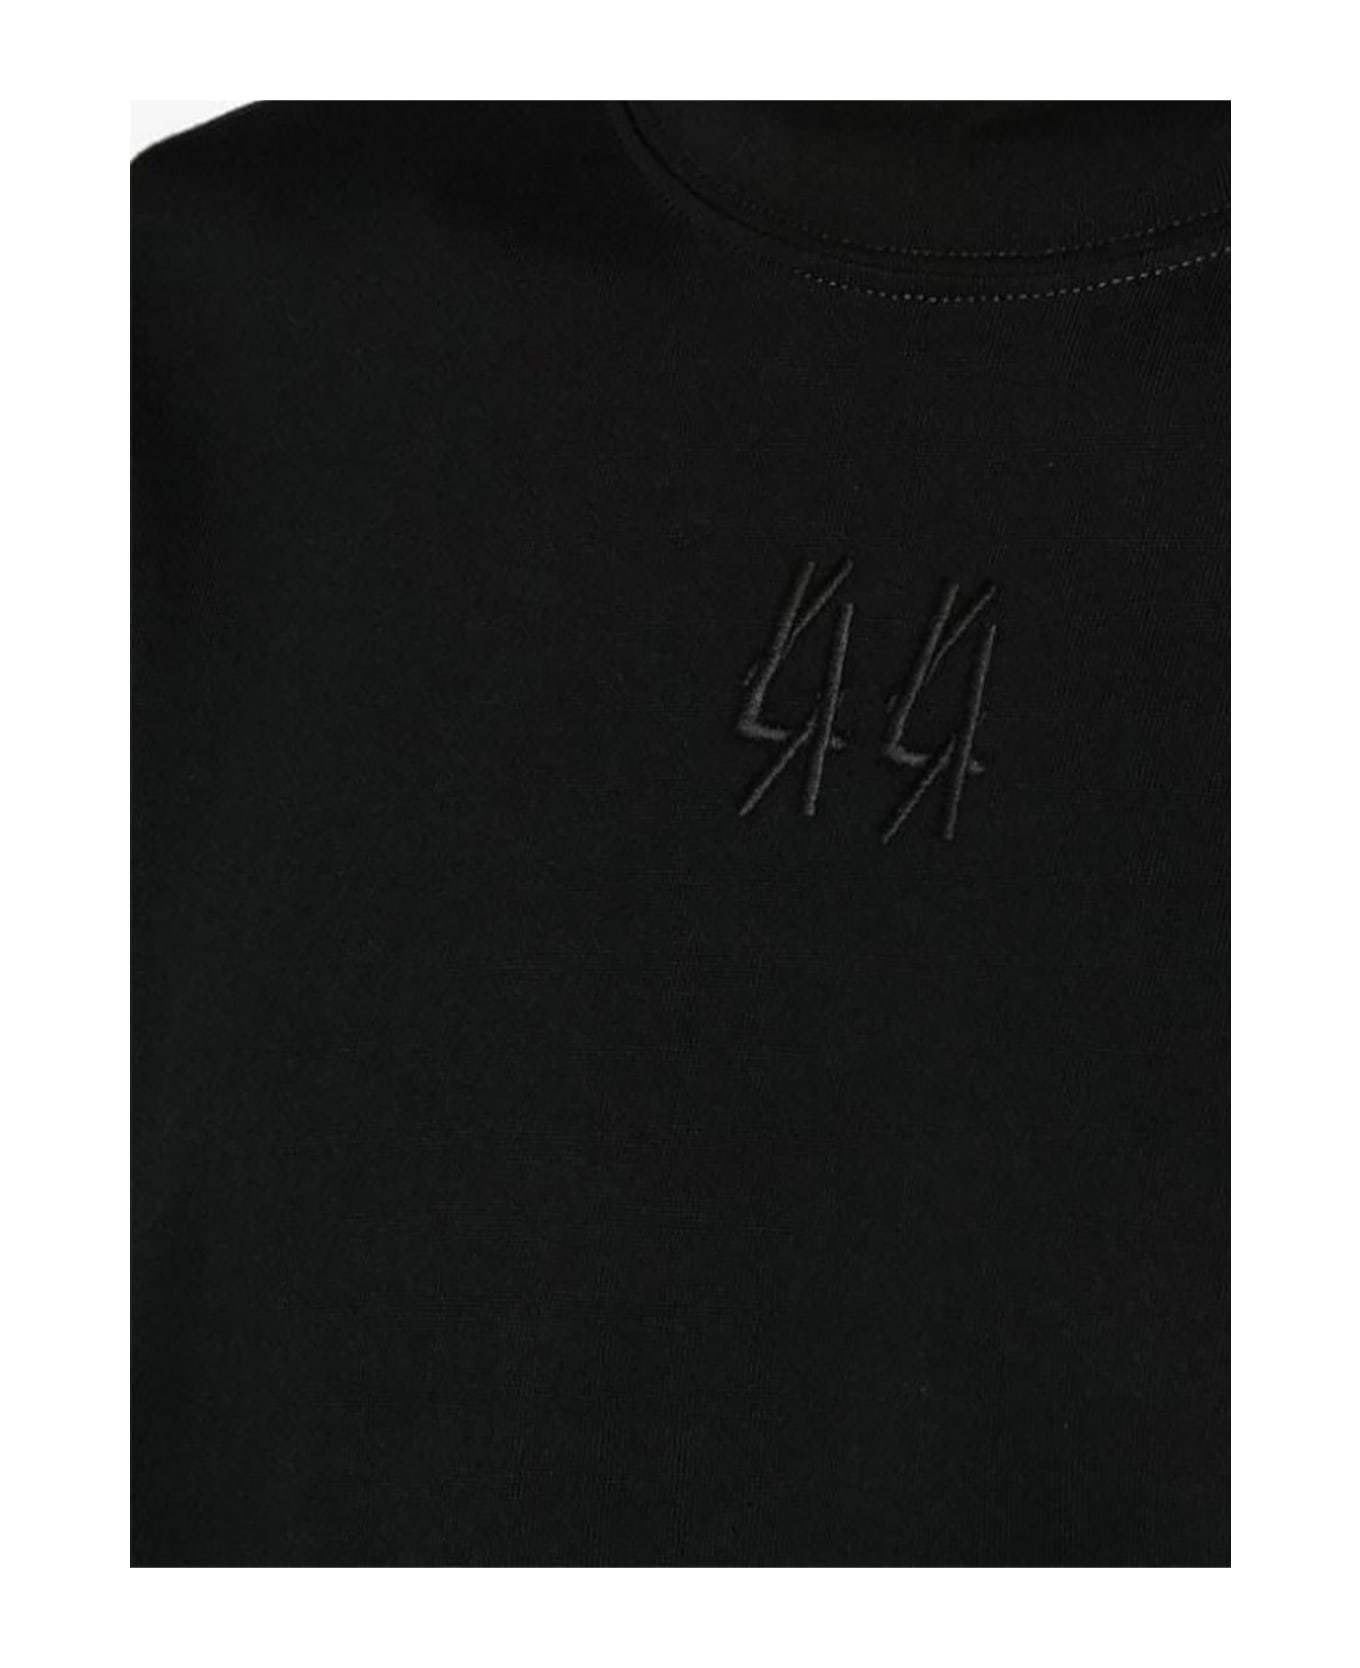 44 Label Group T-shirts And Polos Black - Black シャツ